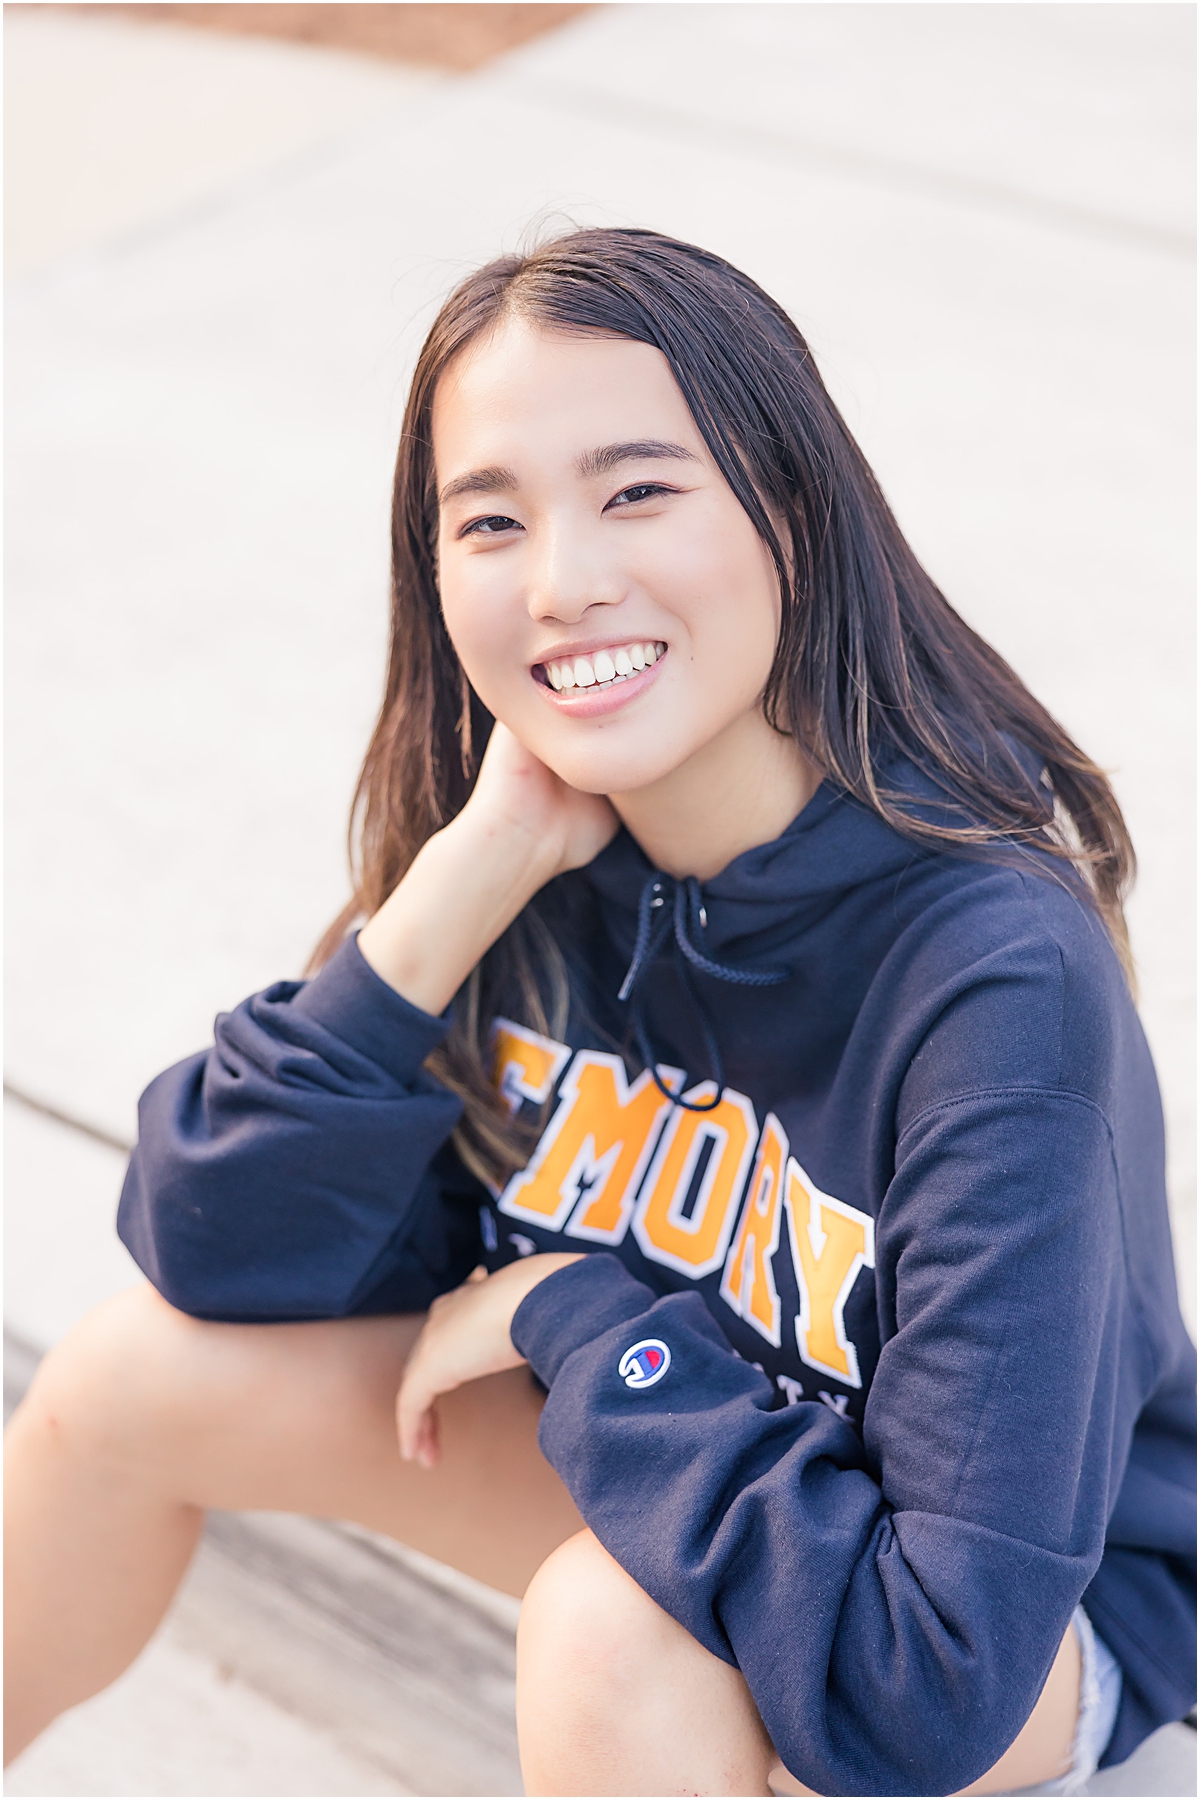 Female graduate sitting on the edge of a sidewalk with her left forearm over her knees and her right elbow propped up on her knee as she leans into her propped hand on the right while wearing a navy blue t-shirt that says "Emory" in yellow block letters with white outlines as she looks up and softly smiles at the Emory University Senior Photographer